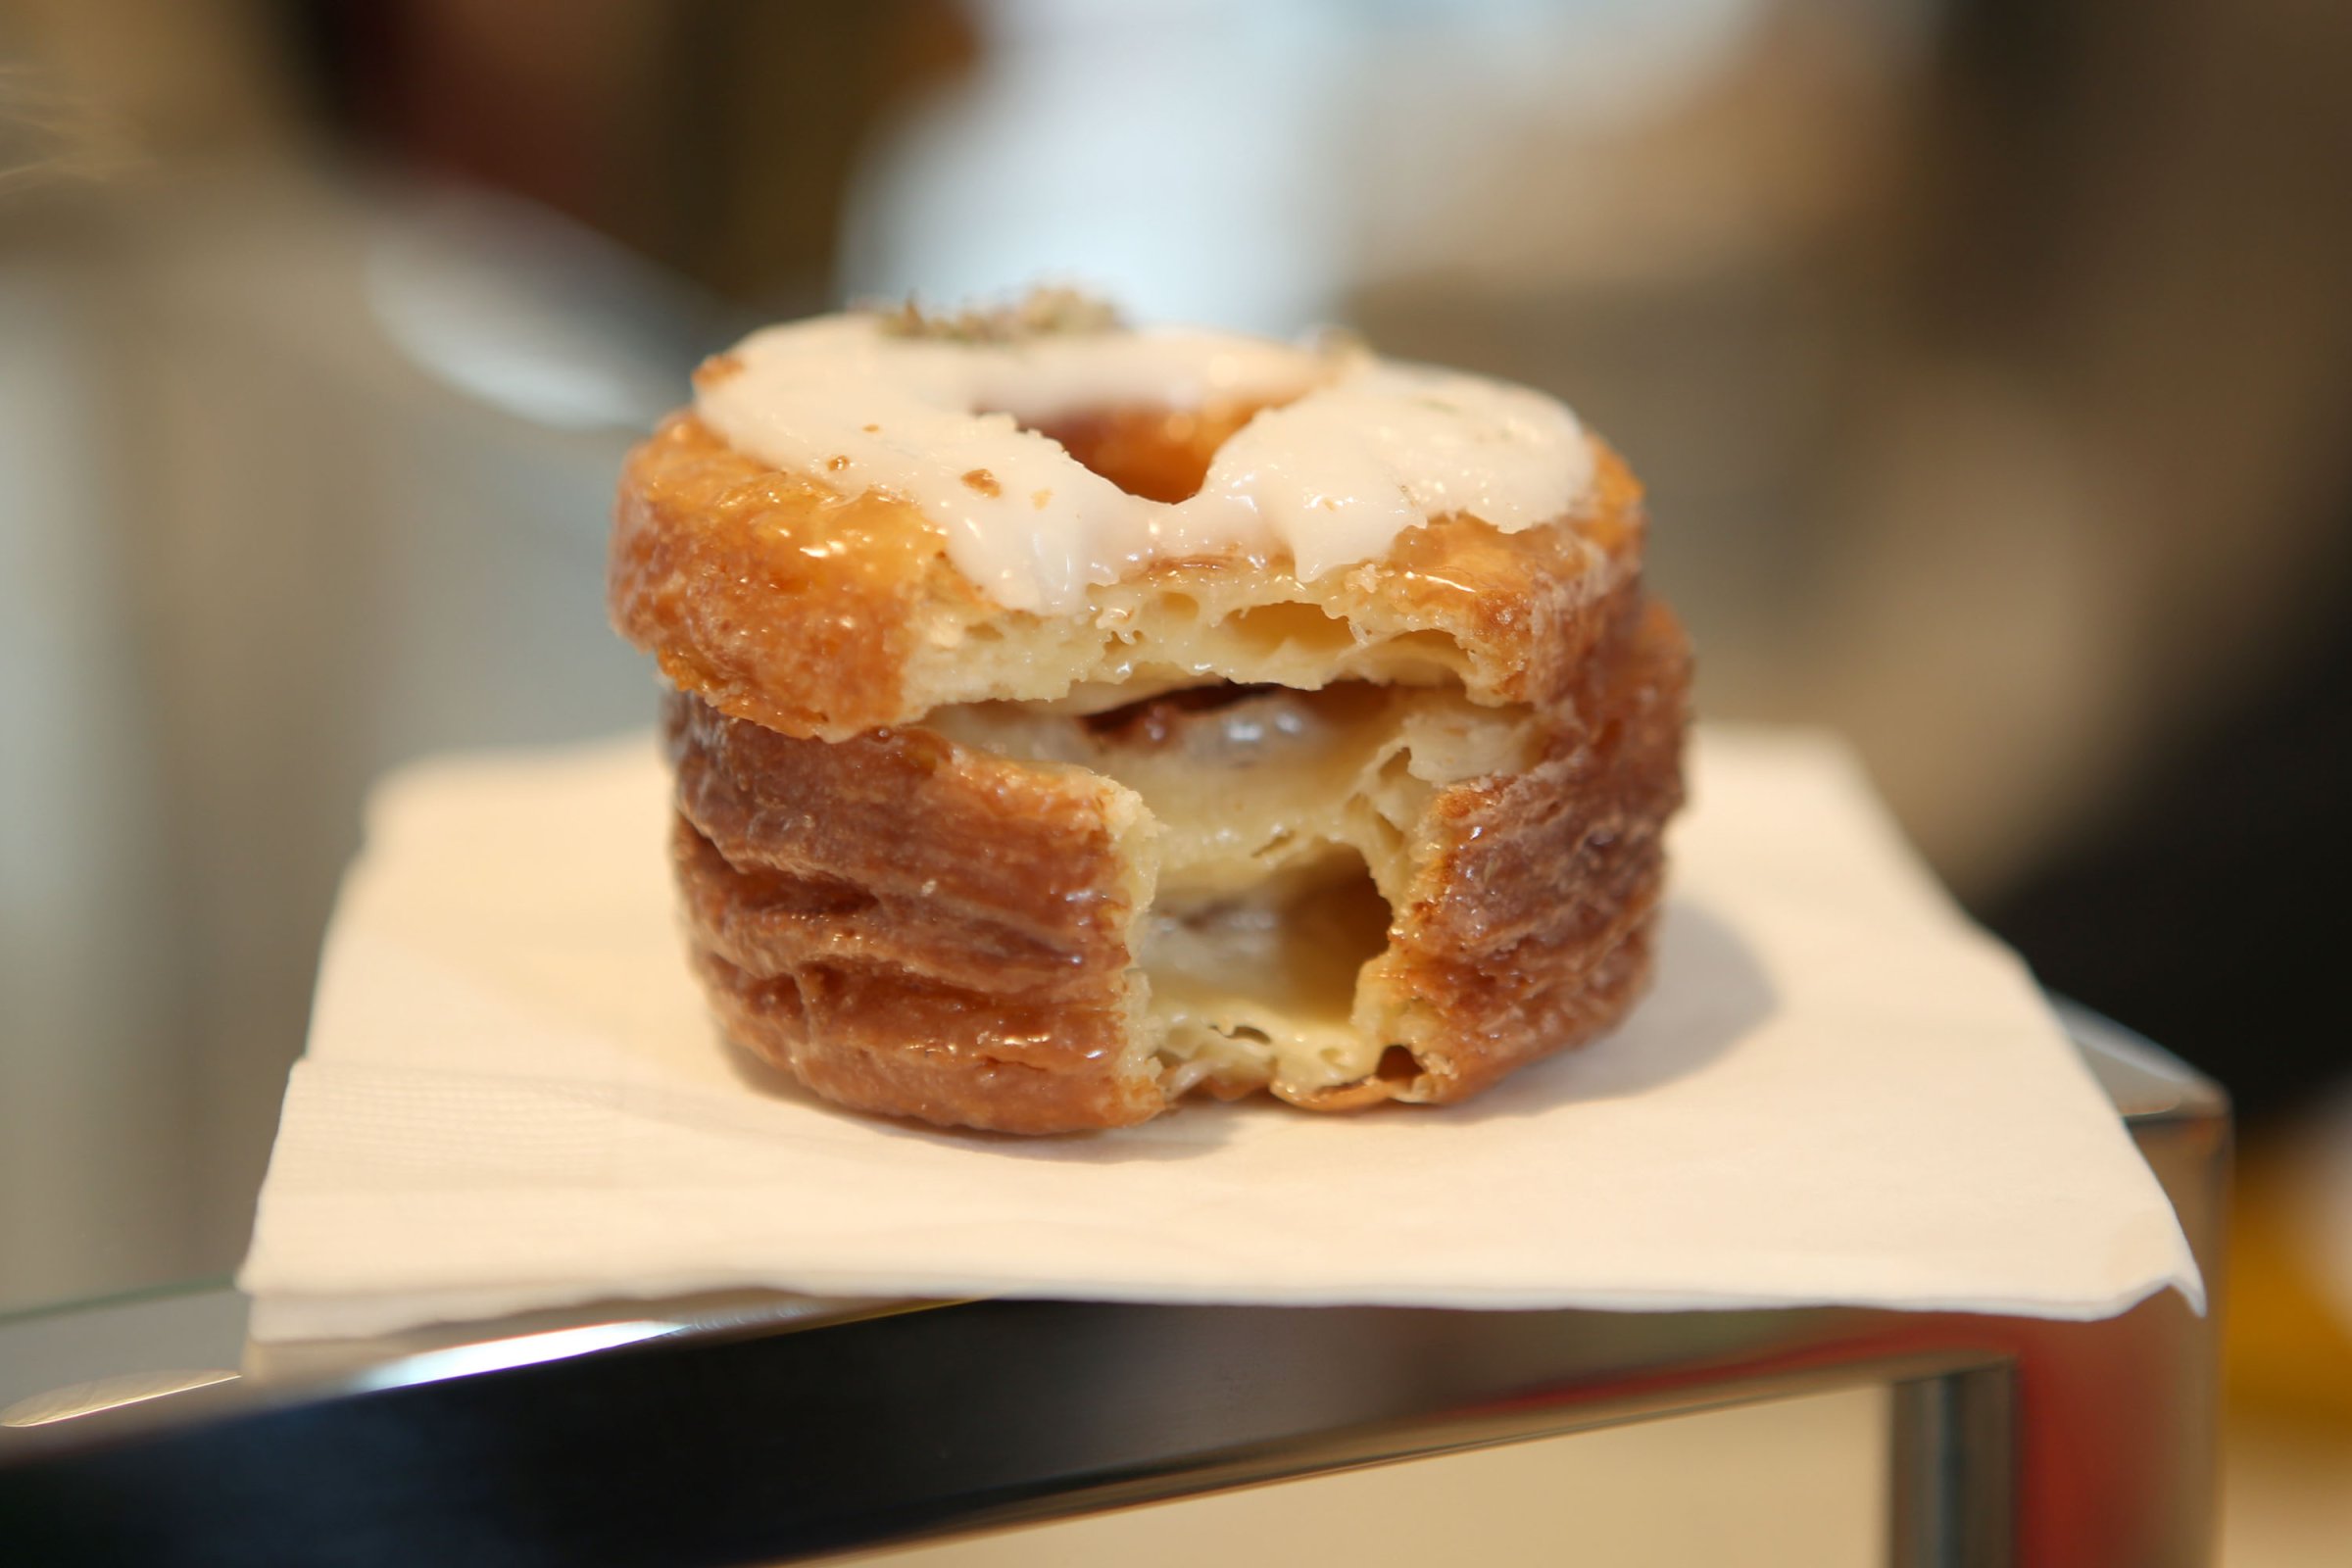 Barneys New York Invites You To Meet Chef Dominique Ansel And Experience Cronut